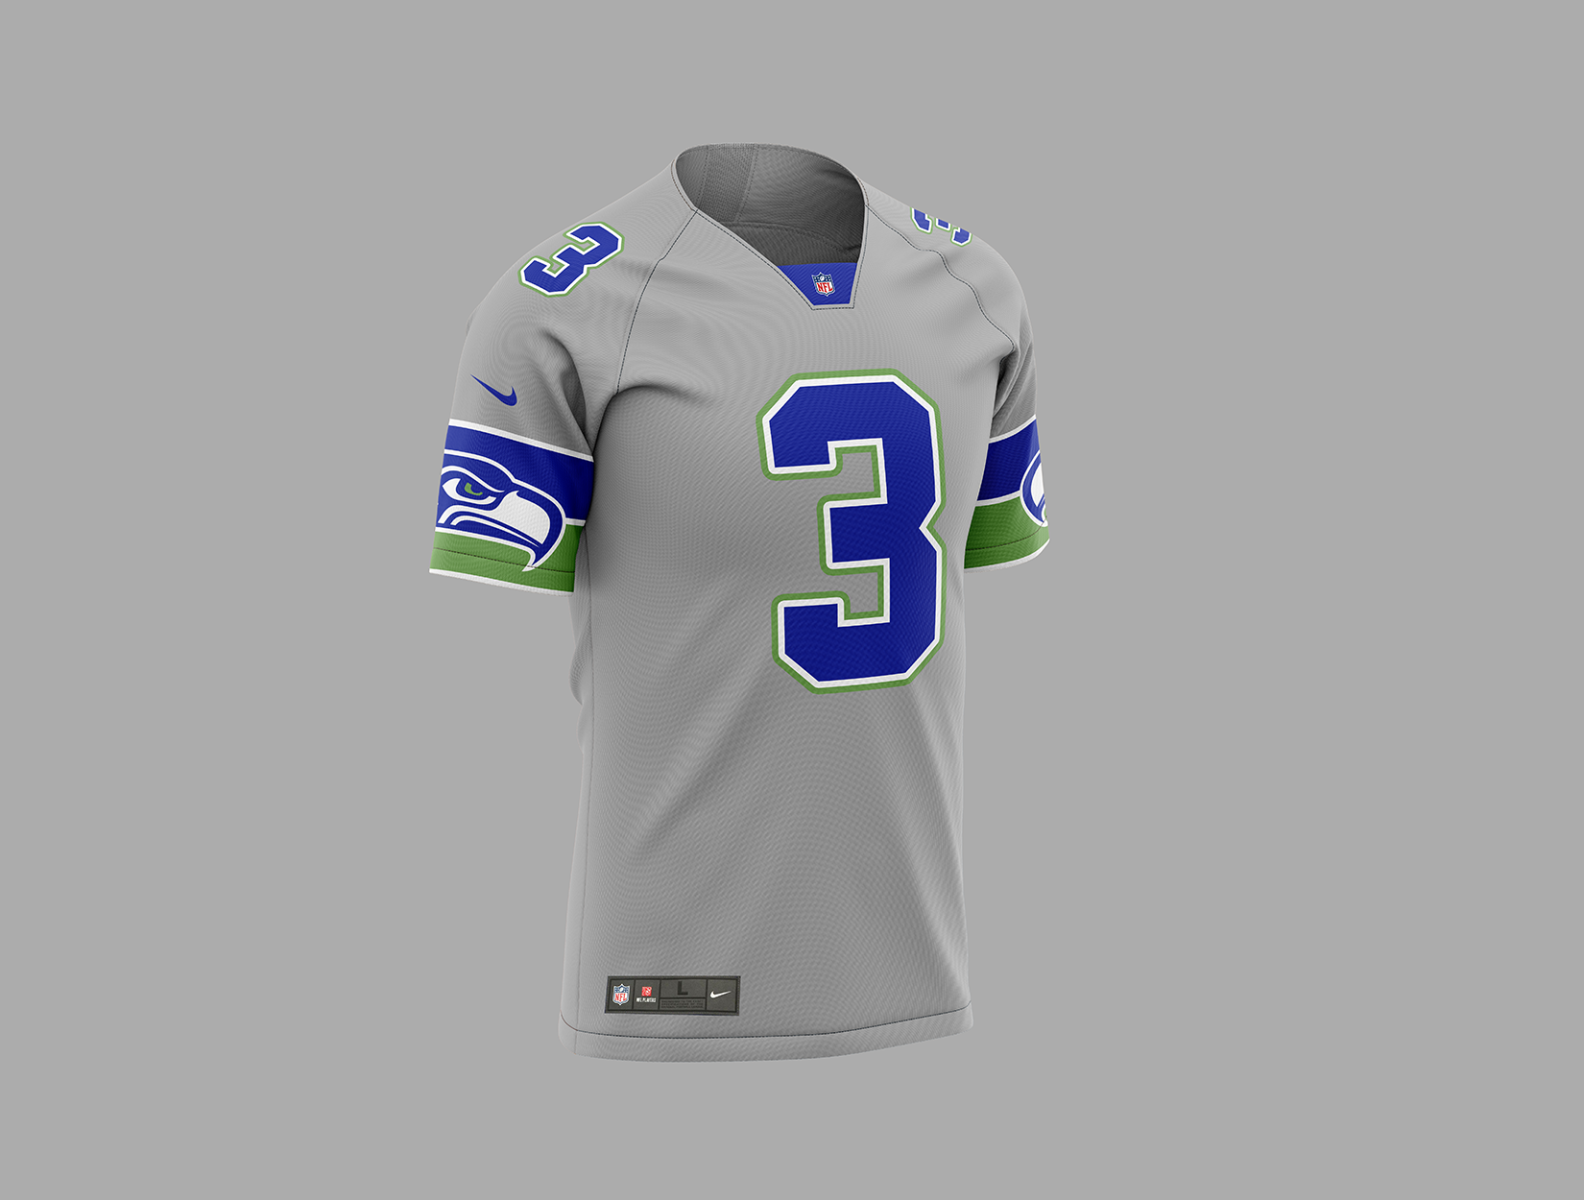 Seattle Seahawks Concept Jersey 2020 by Luc S. on Dribbble